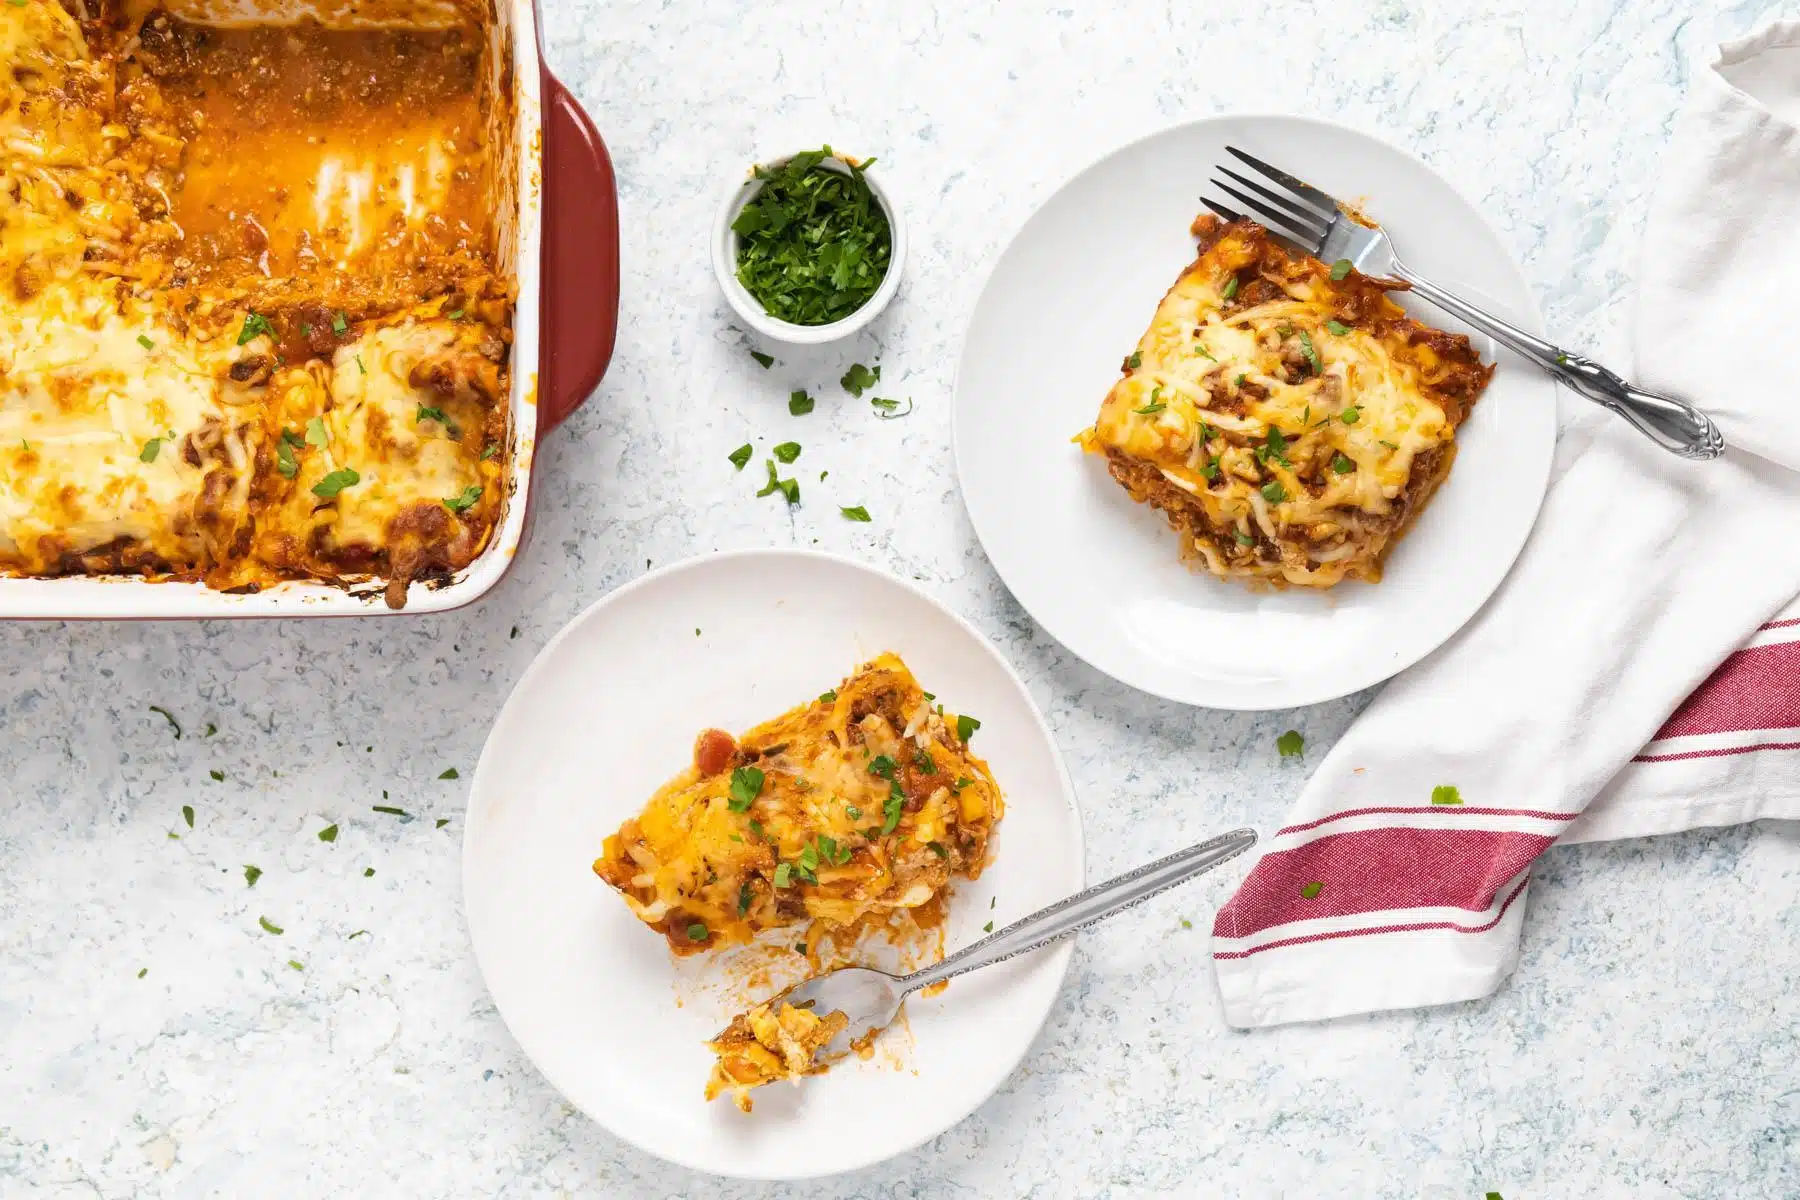 Lasagna pan on a white table with a slice of lasagna on a plate.